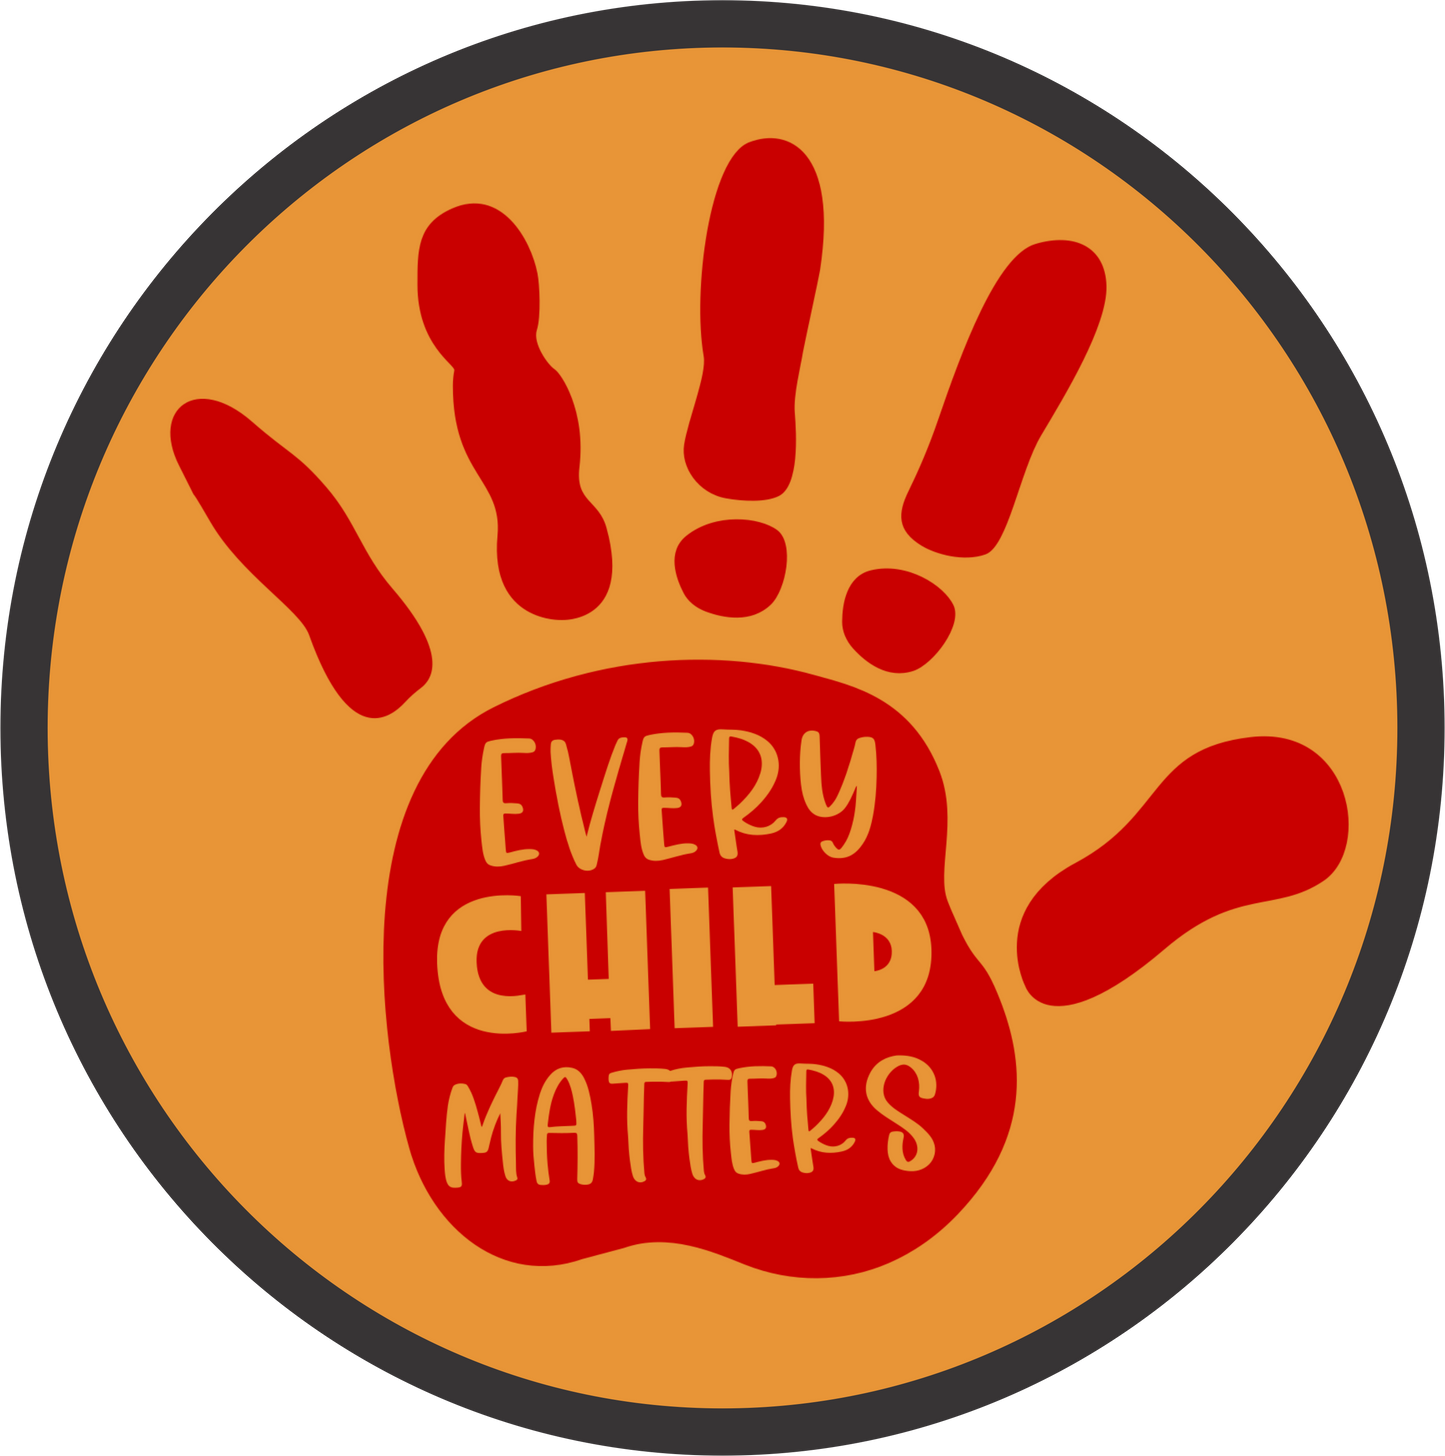 Every child matters with hand round